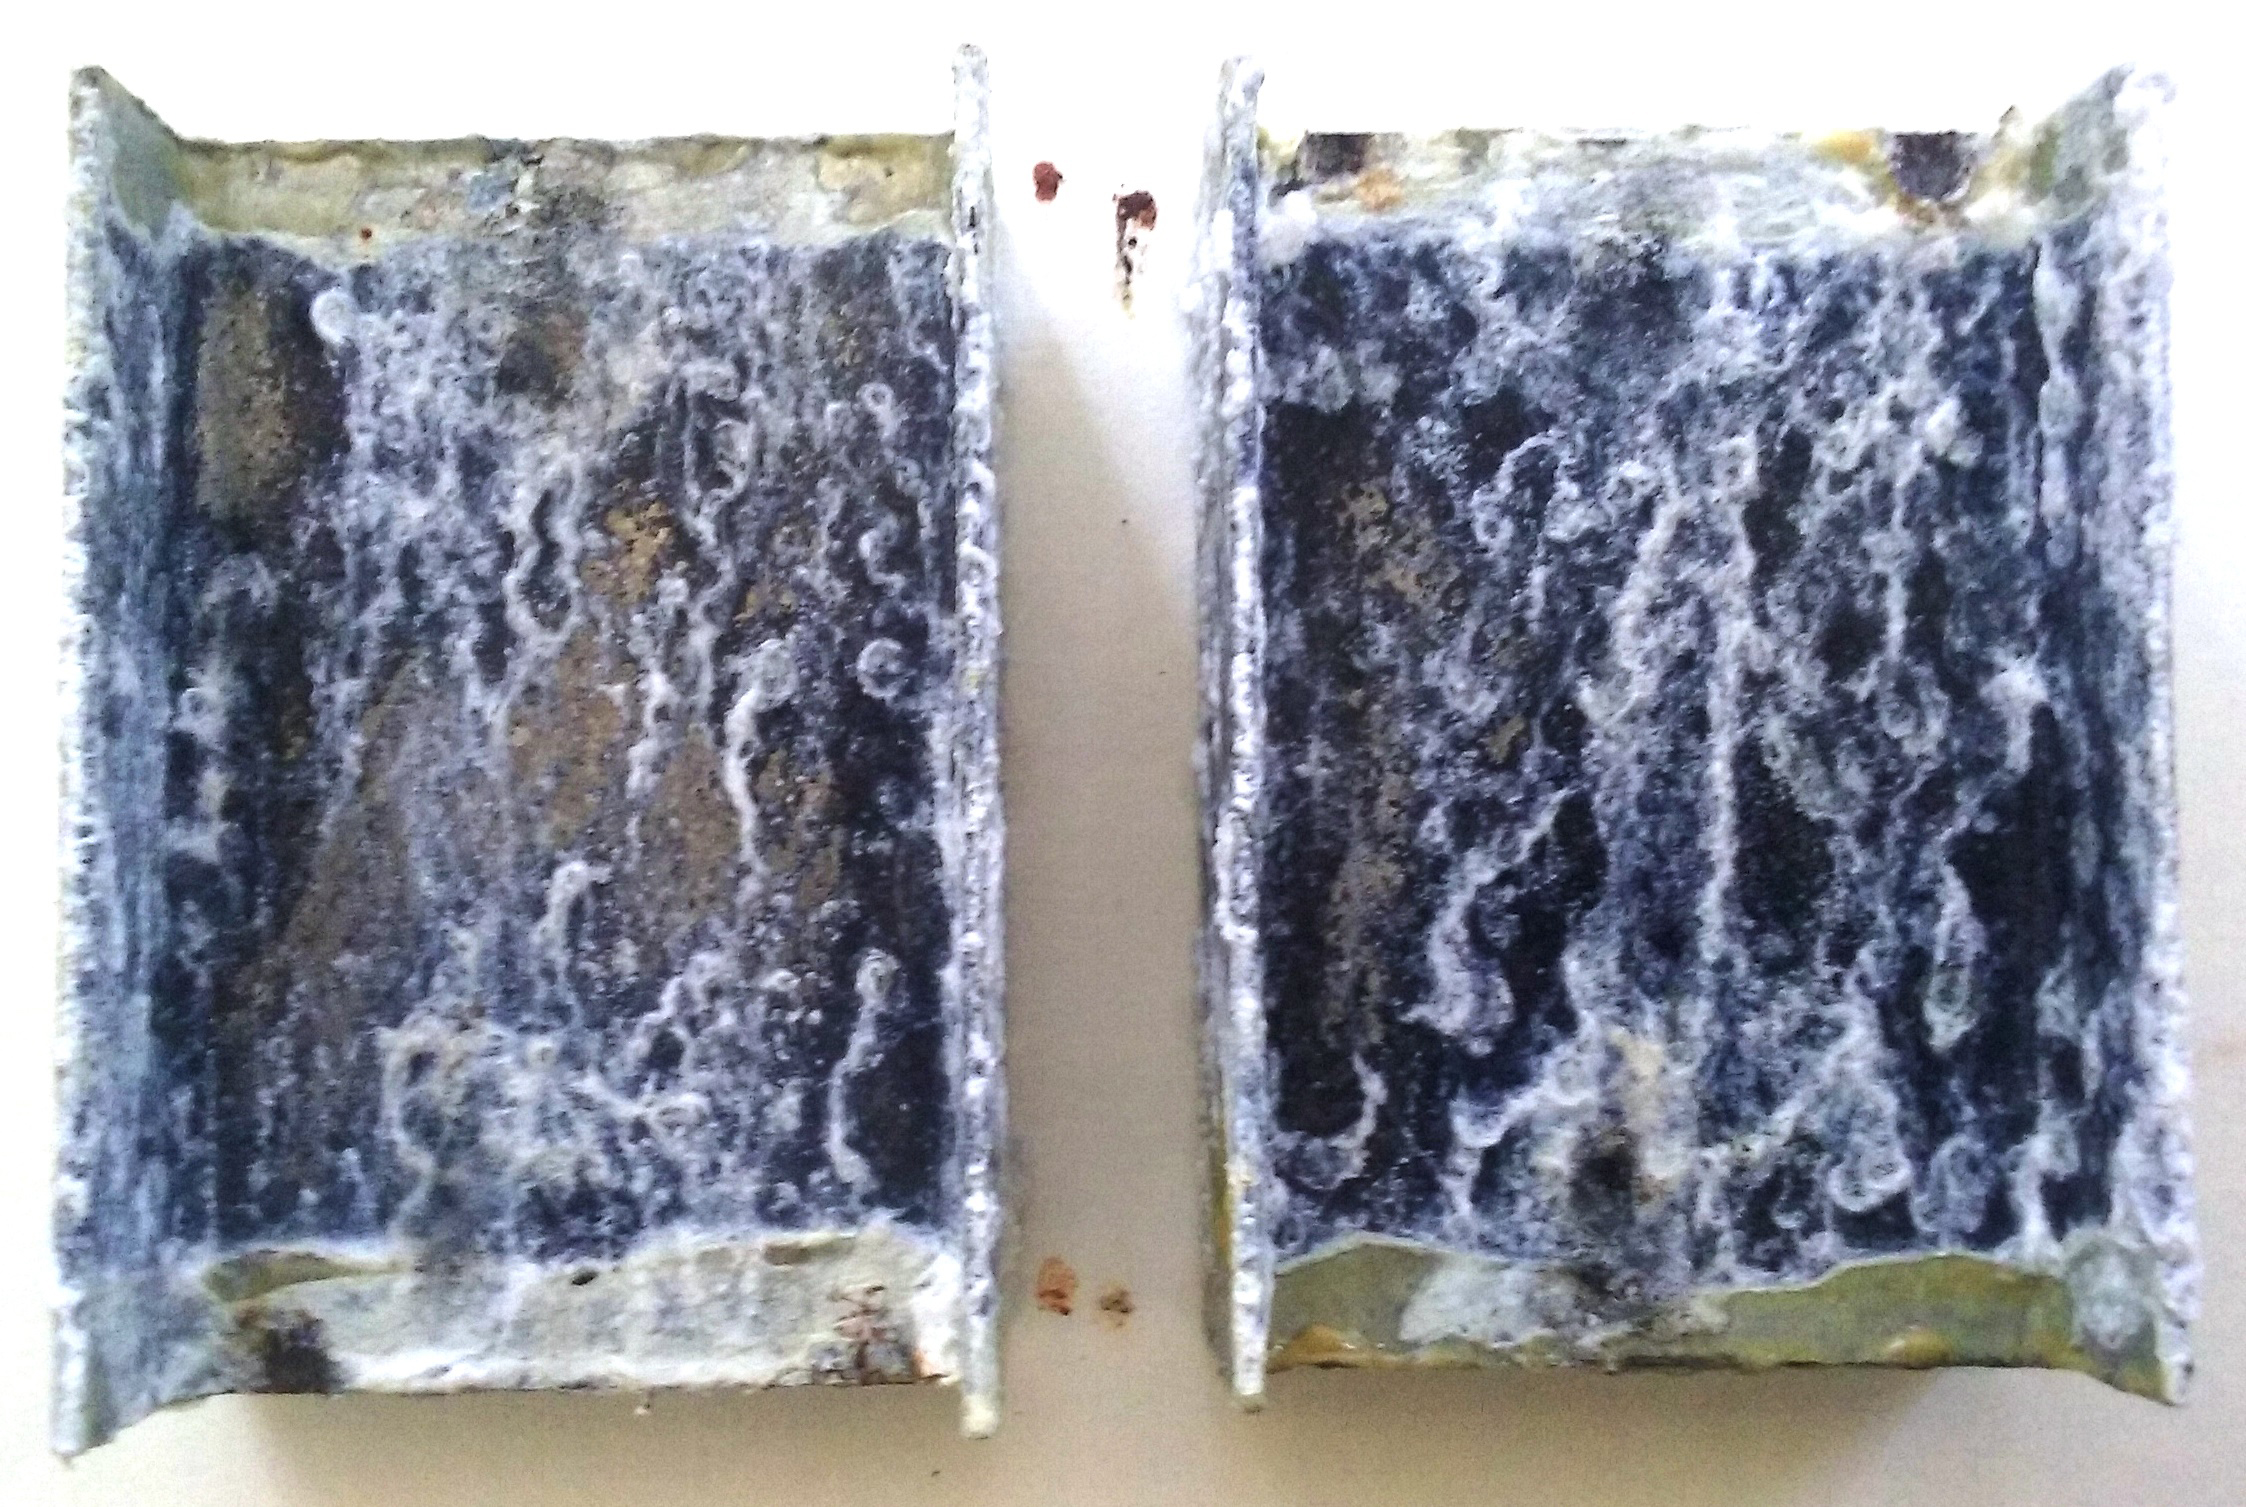 The continuous salt spray exposure caused the galvanized sample to begin visibly shedding its protective zinc coating in the form of zinc oxide, also known as white rust.